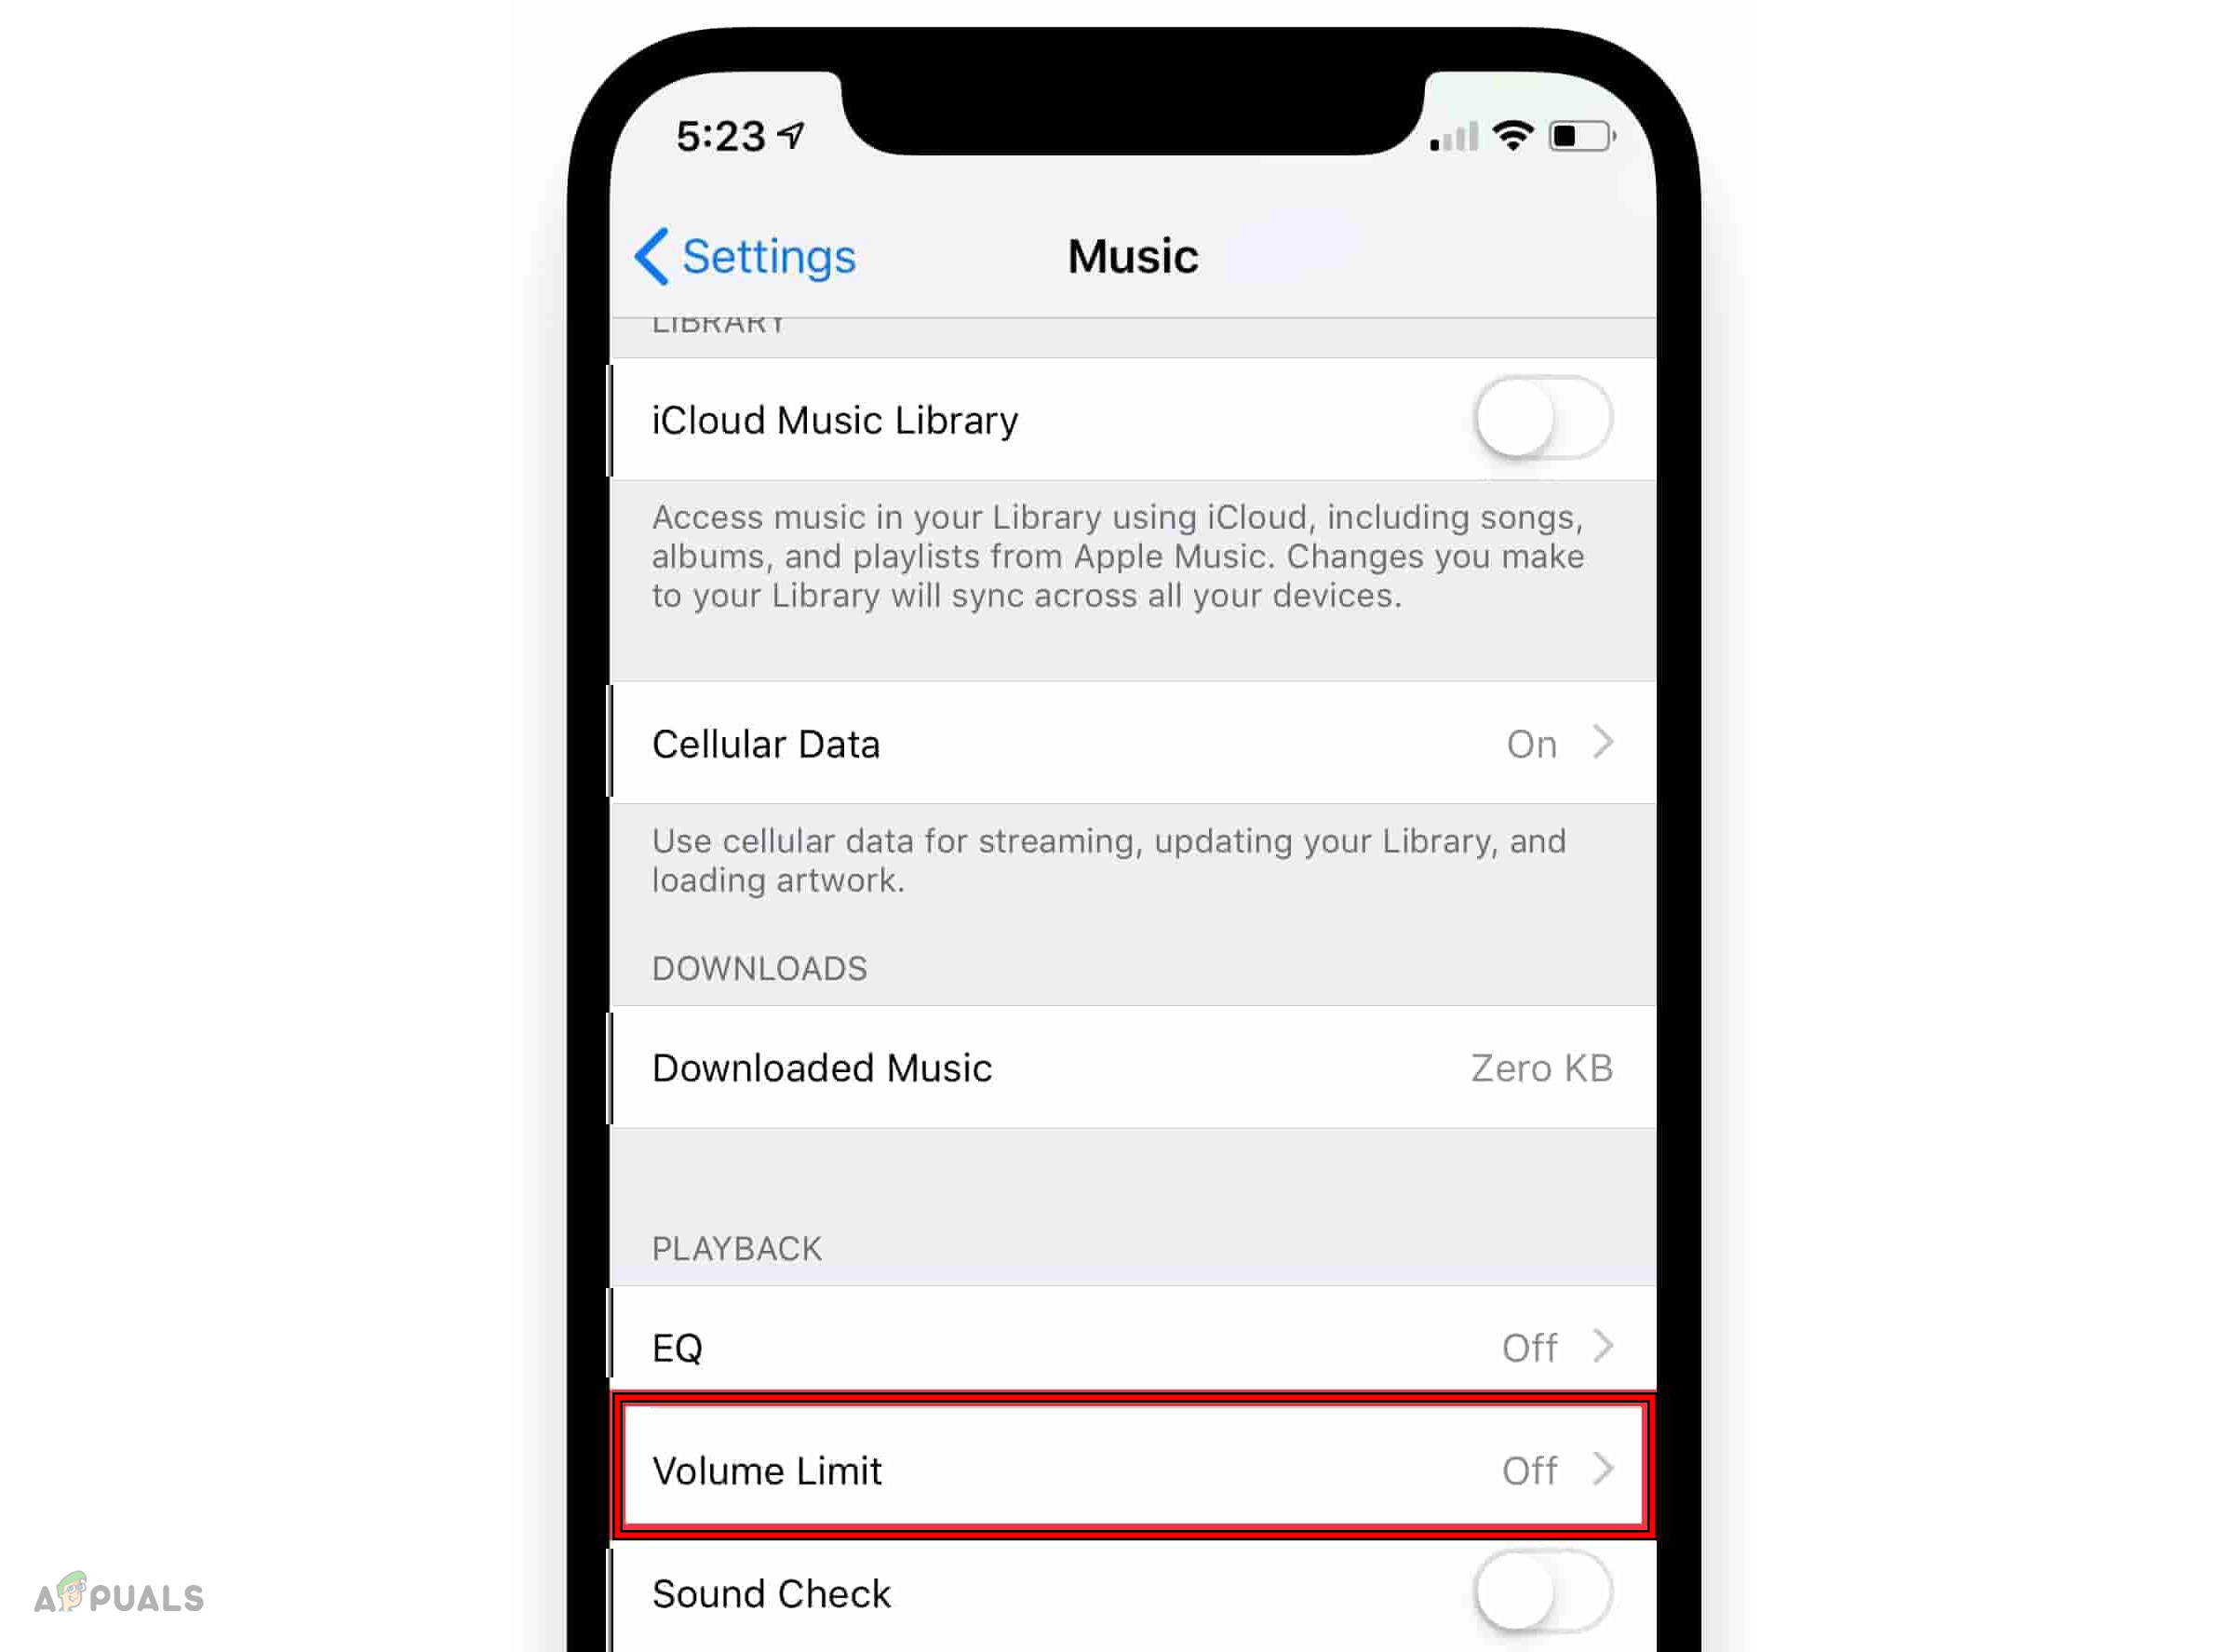 Disable Volume Limit on the AirPods